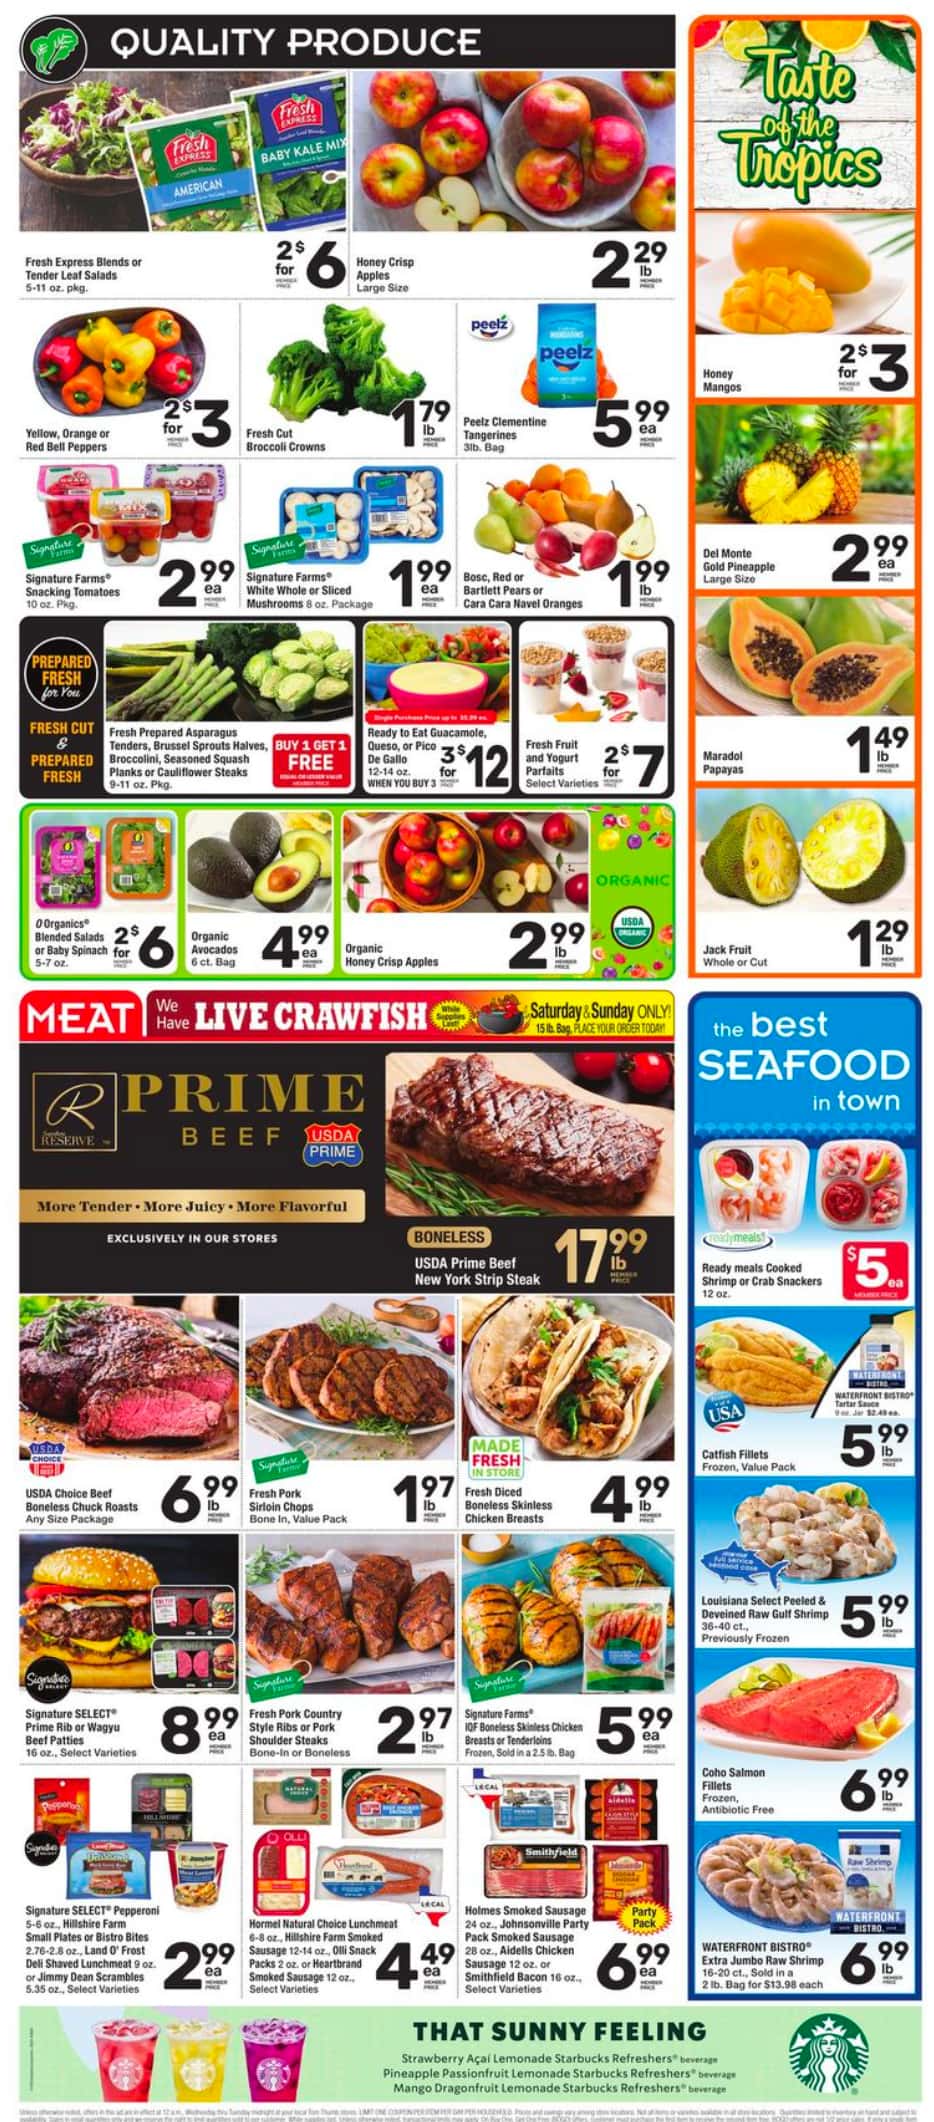 TomThumb_weekly_ad_041024_04